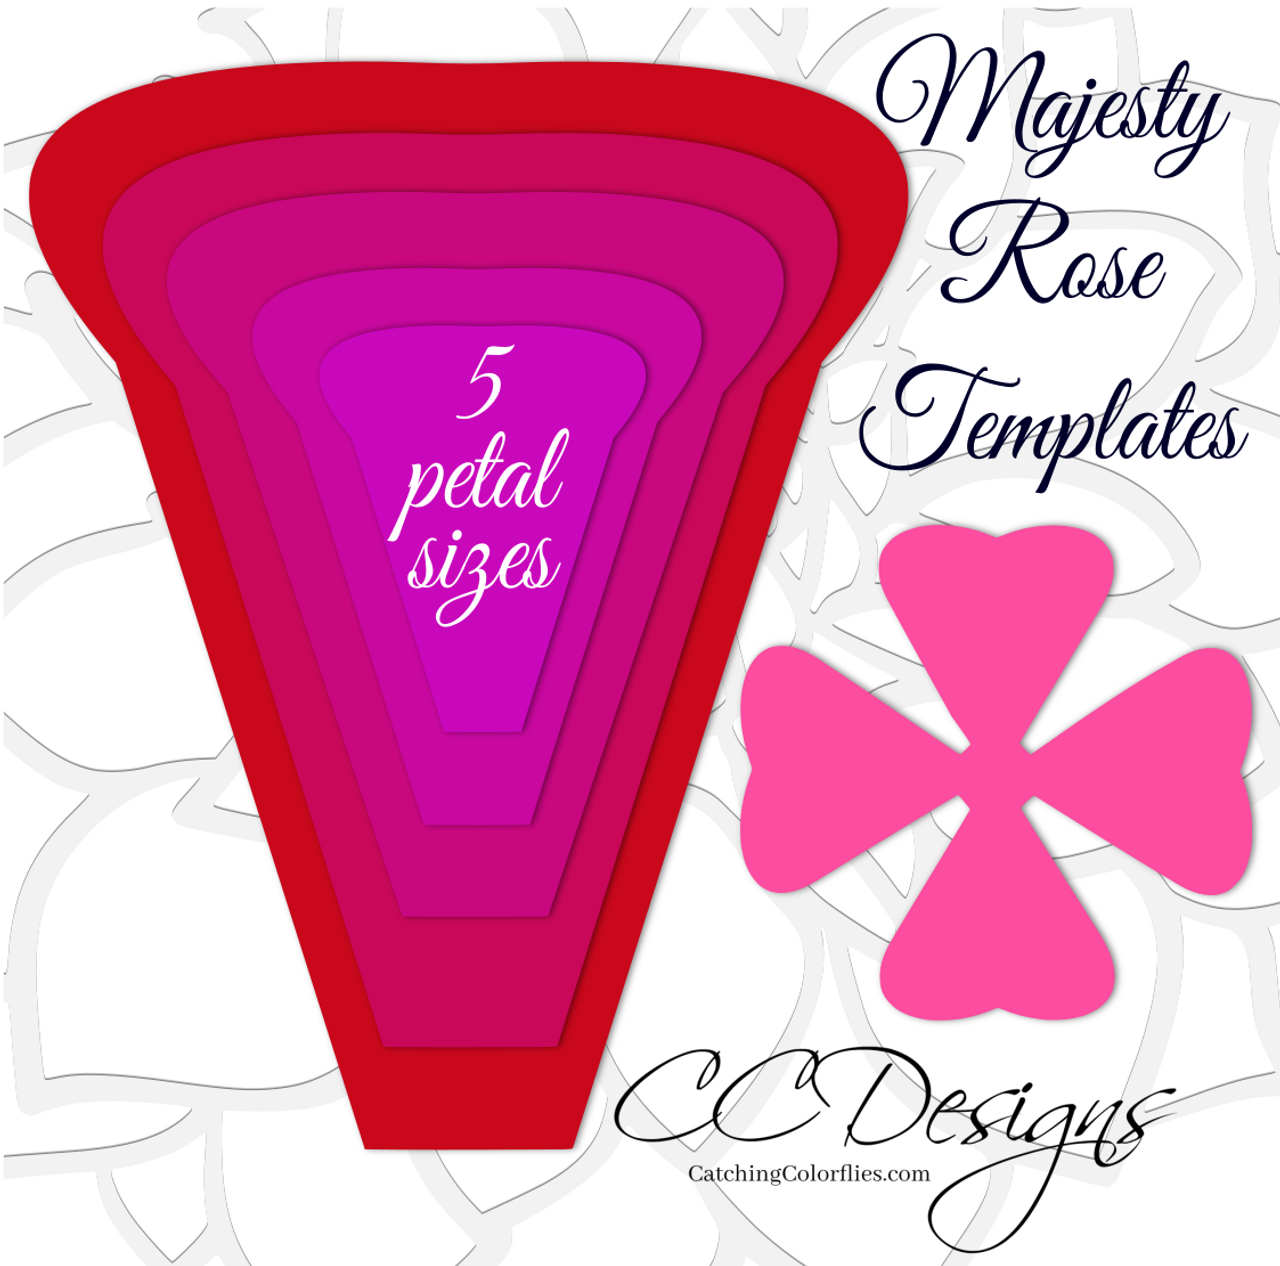 Download Majesty Style Rose- Giant Paper Rose Templates - Catching ...